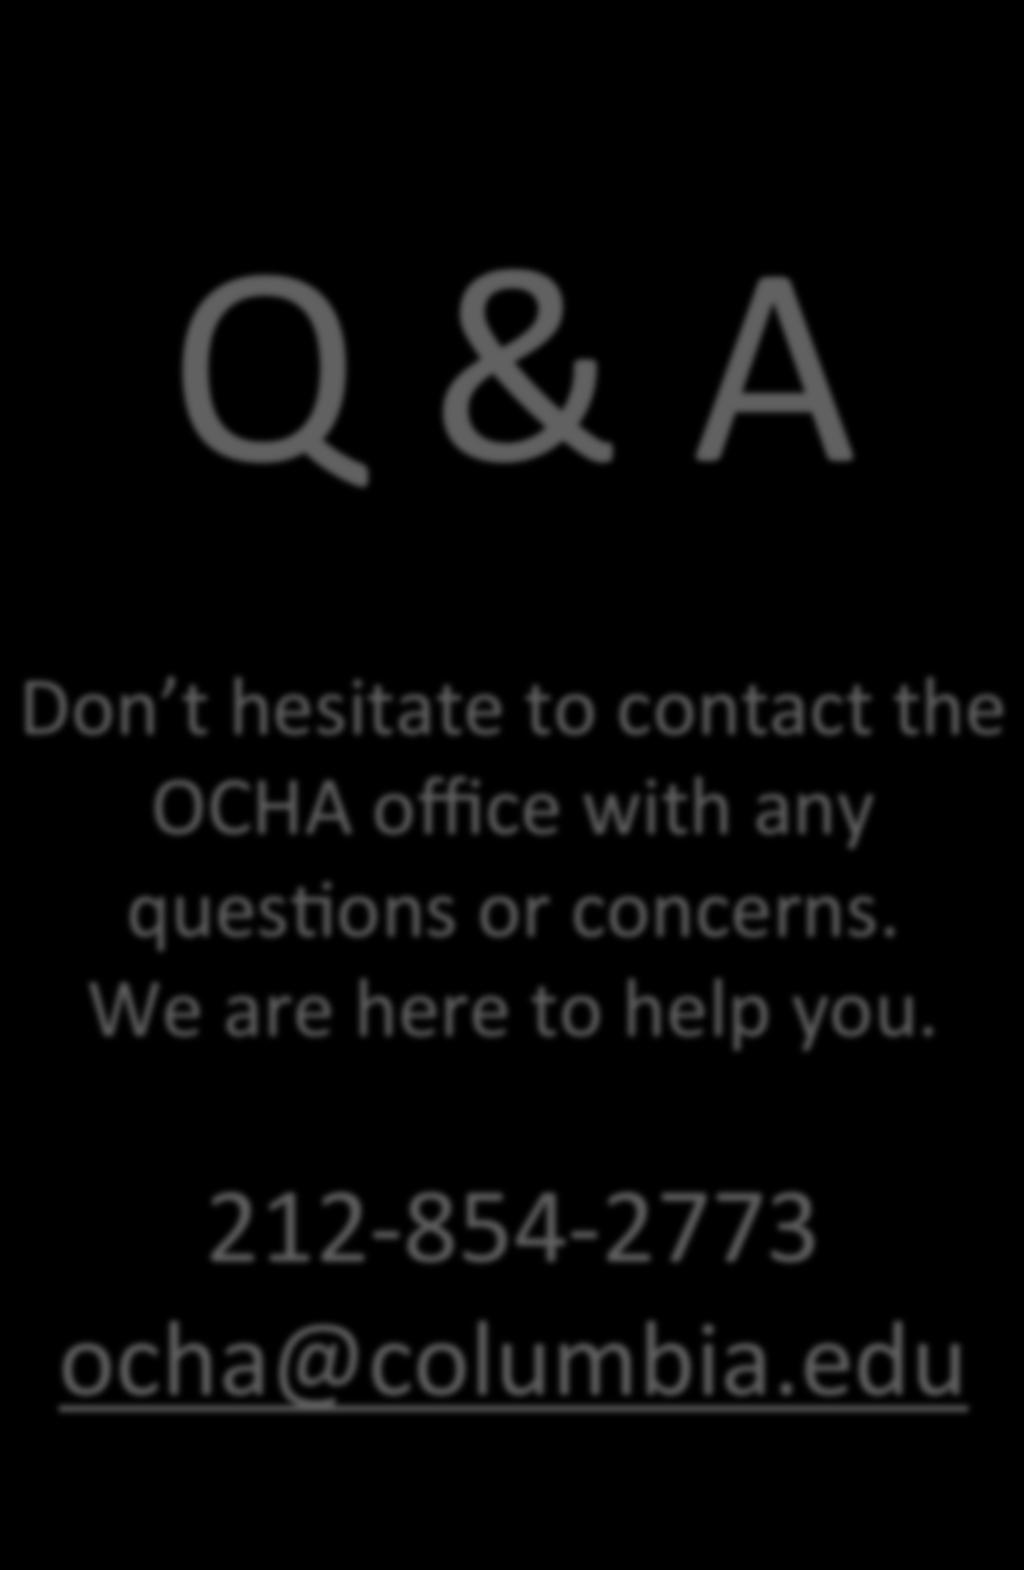 Q & A Don t hesitate to contact